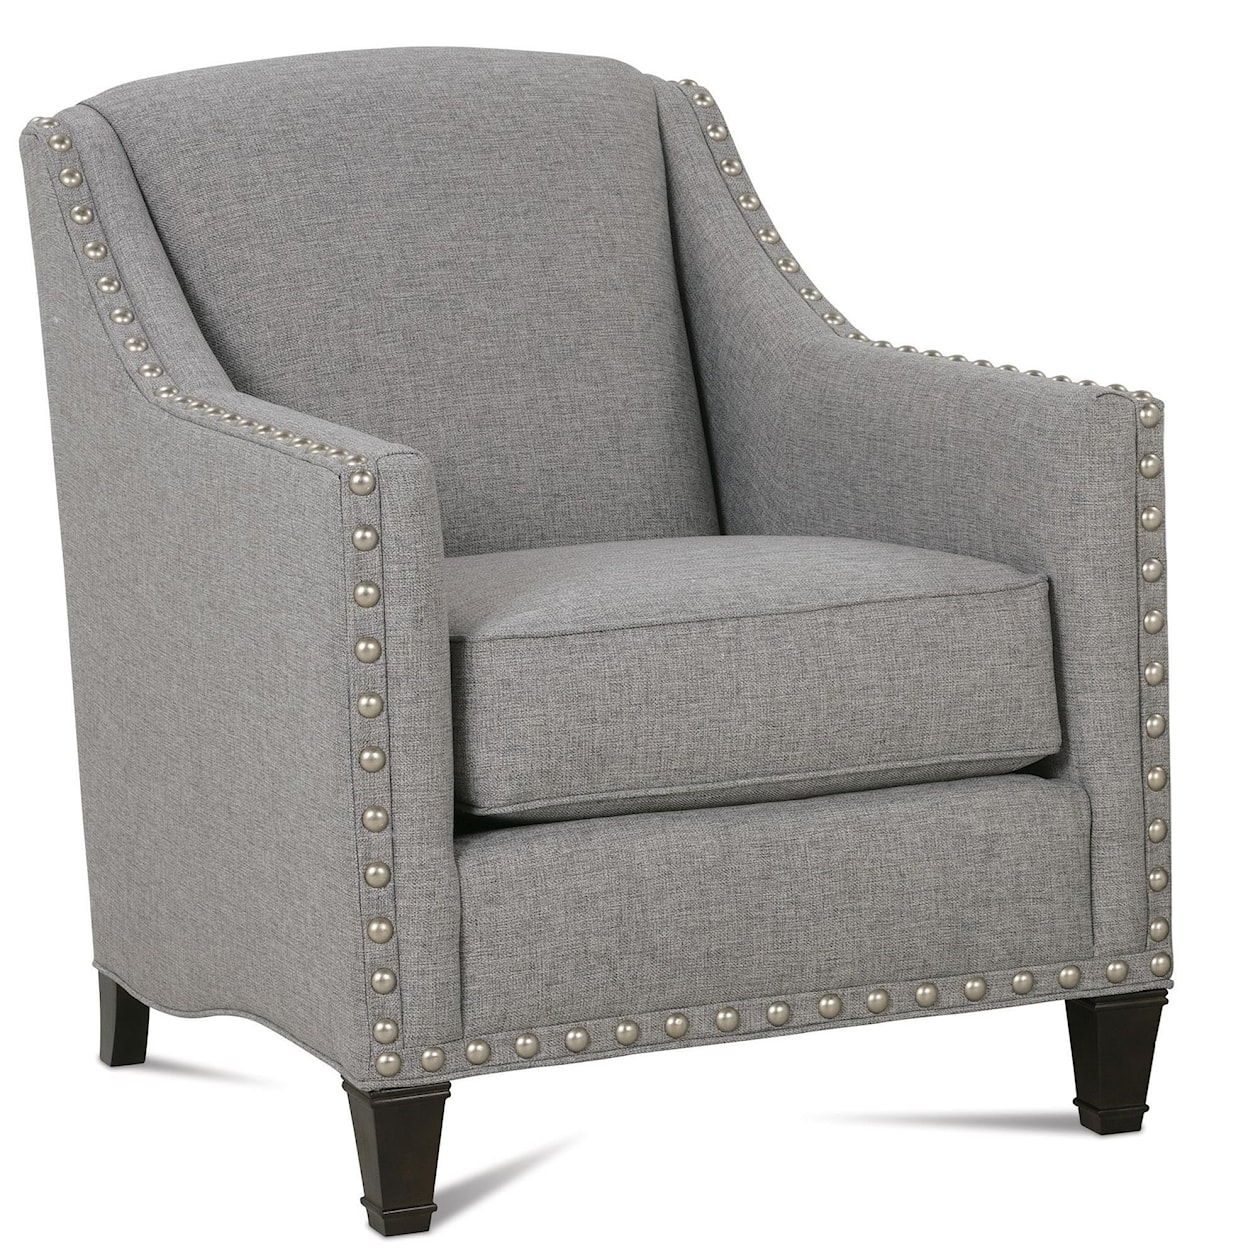 Rowe Rockford Traditional Upholstered Chair